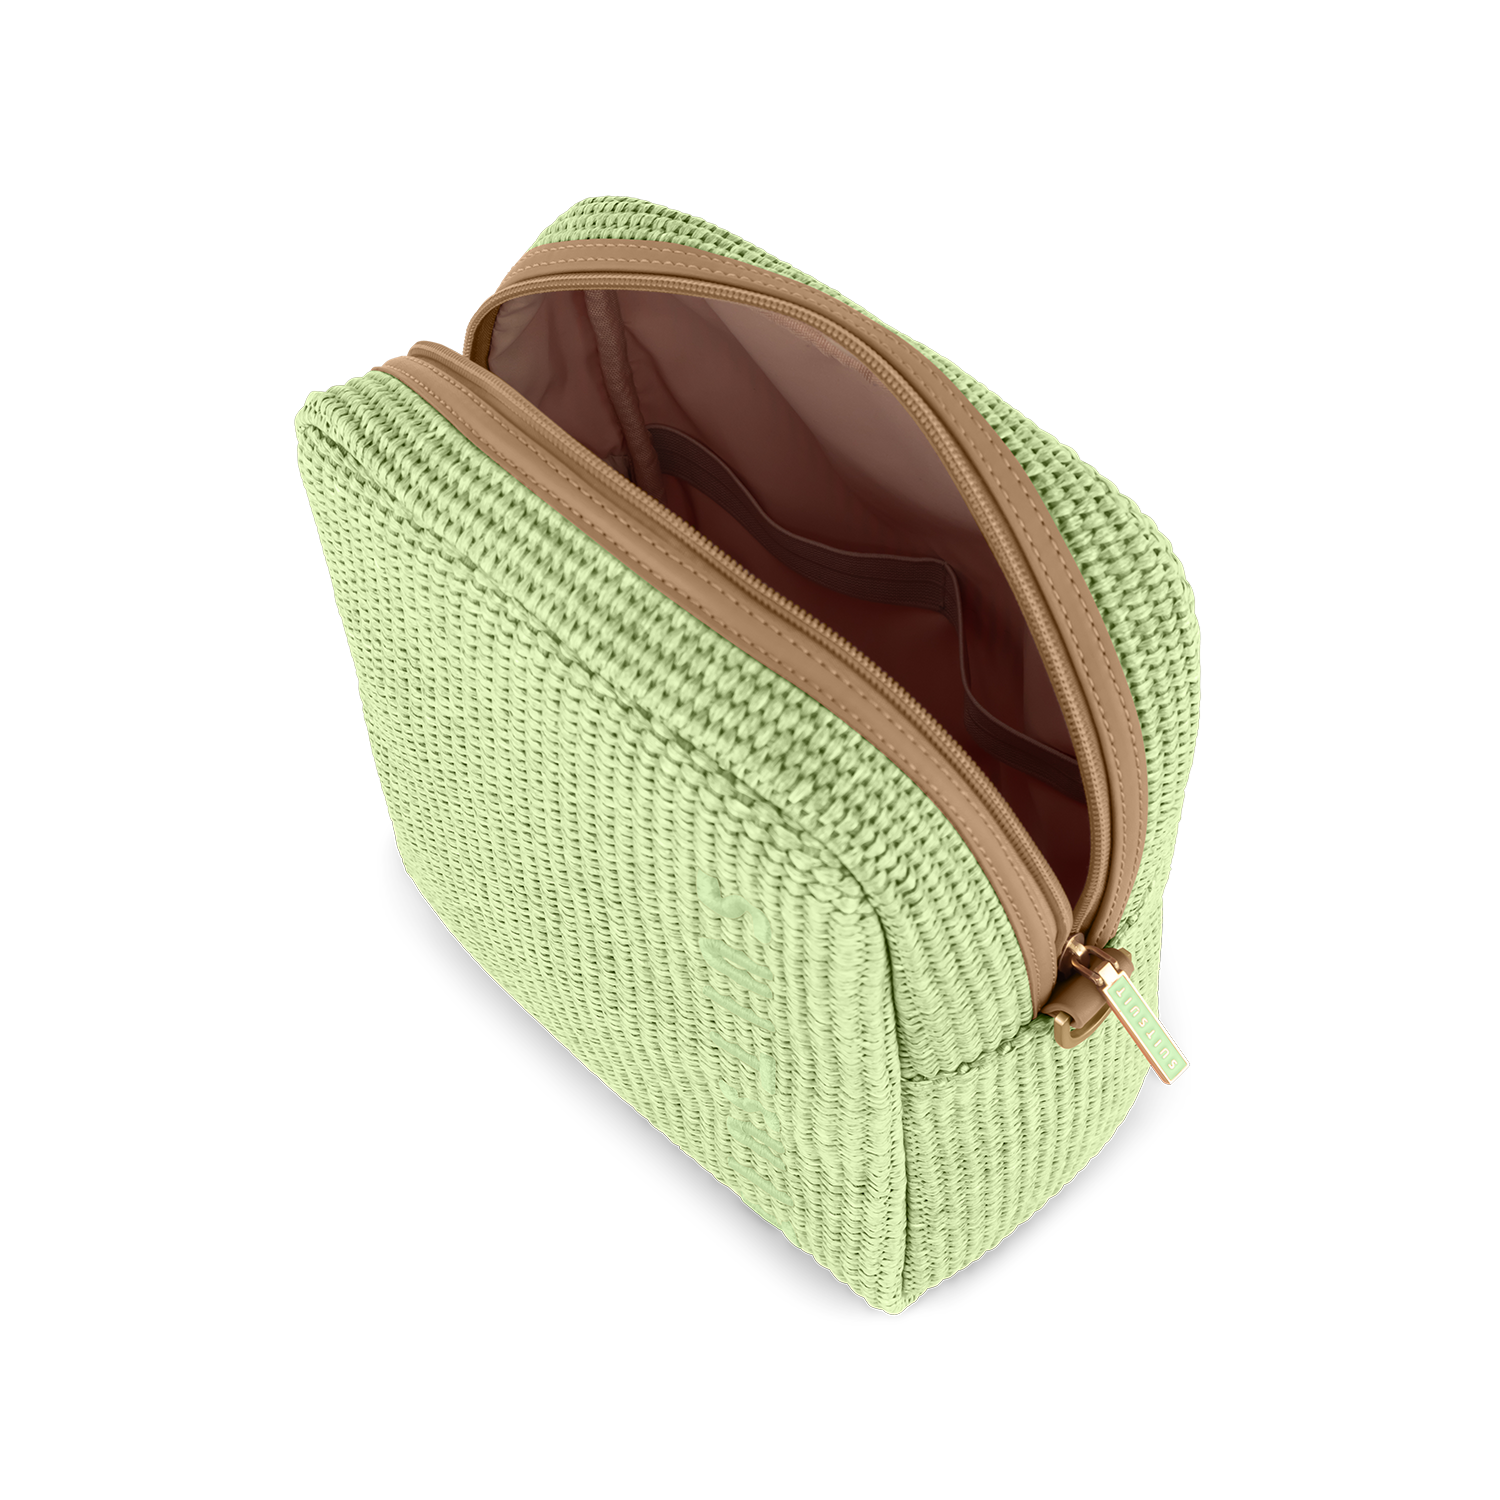 Fusion - Butterfly Green - Upright Toiletry Bag